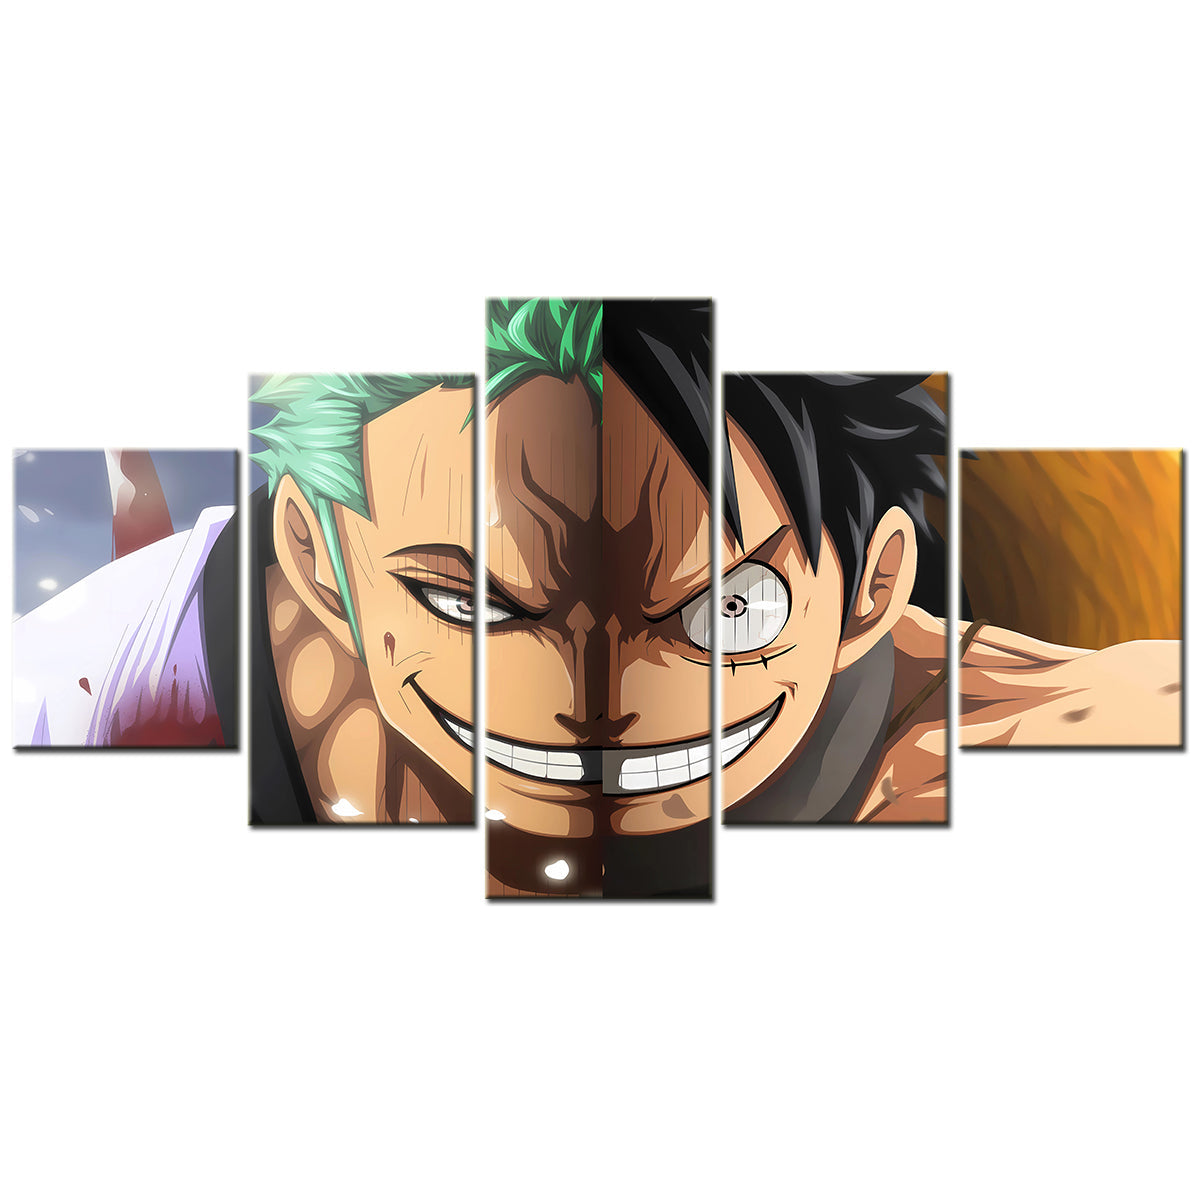 One Piece - 5 Pieces Wall Art - Monkey D. Luffy - Roronoa Zoro - Printed Wall Pictures Home Decor - One Piece Poster - One Piece Canvas